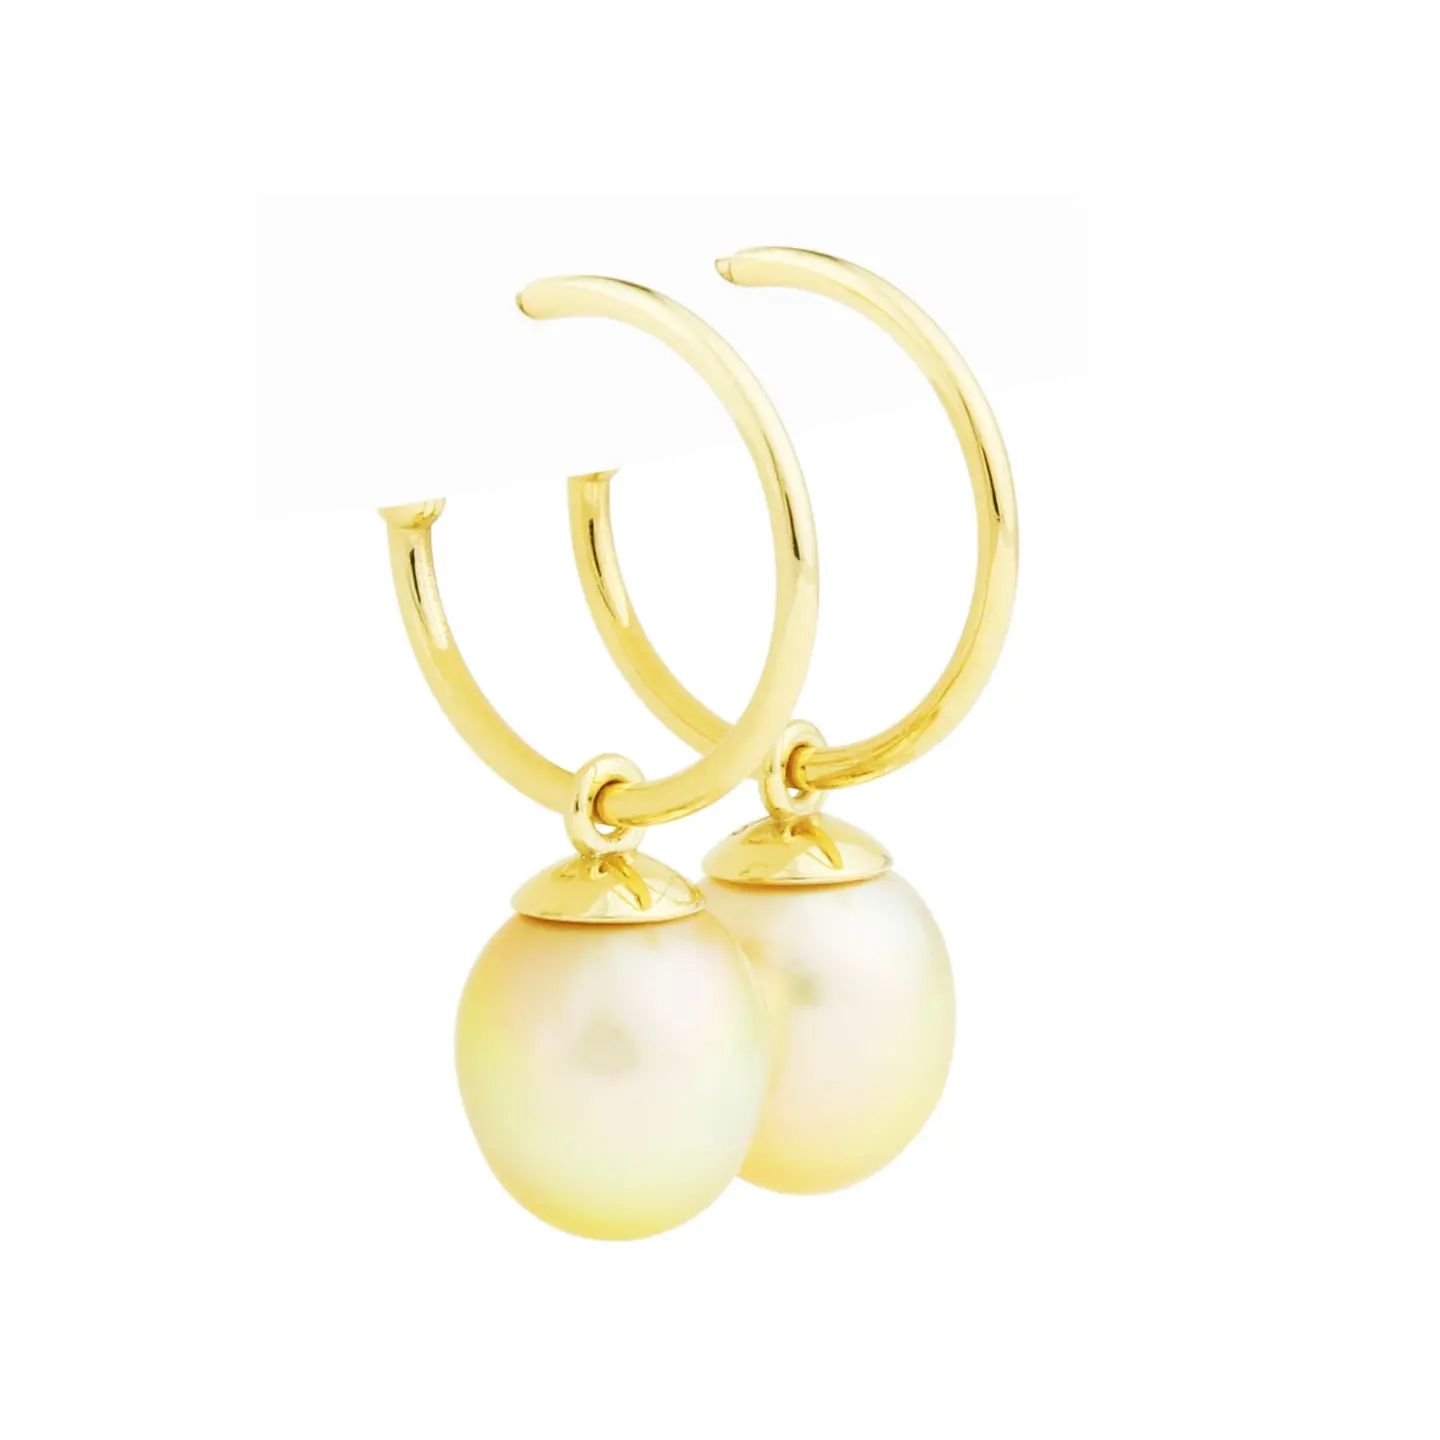 This breathtaking take on our 'Archery Hoops' features a set of stunning ombre Burmese golden pearls, set in 9ct yellow gold. 

Available in New York! Follow the link for more information below: 

https://flyingsolo.nyc/designer/magnolia-designs/